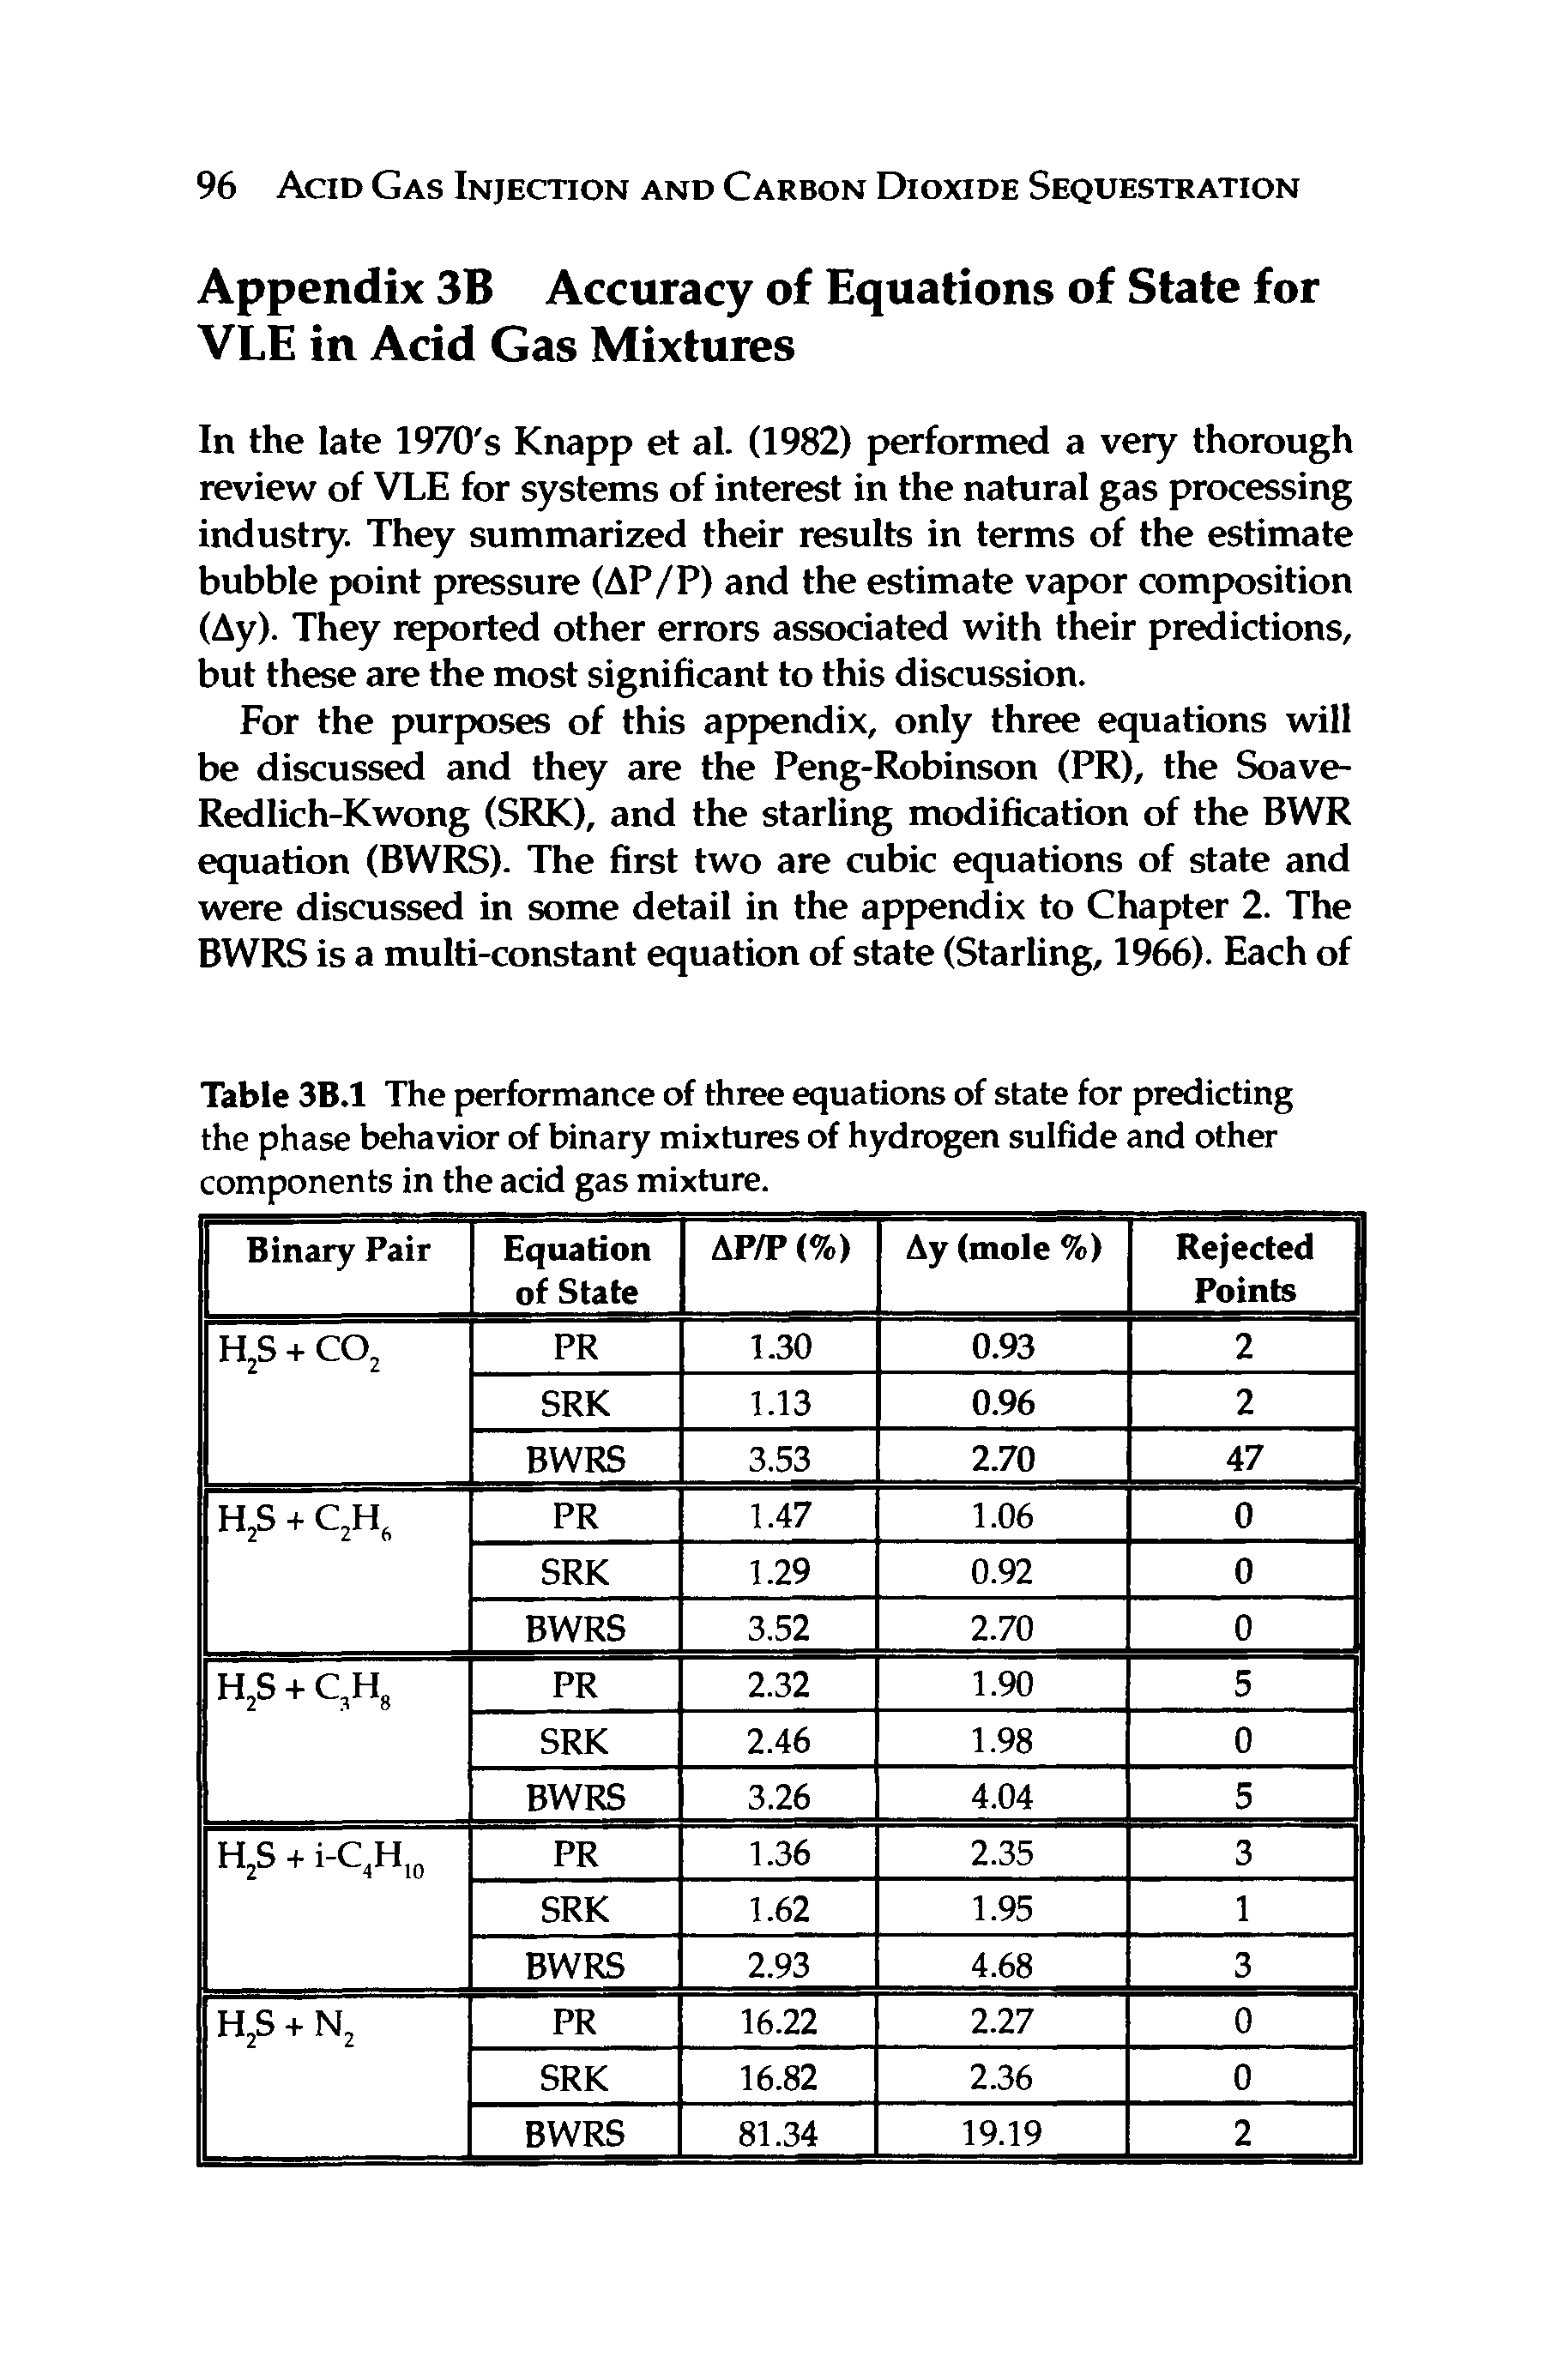 Table 3B.1 The performance of three equations of state for predicting the phase behavior of binary mixtures of hydrogen sulfide and other components in the acid gas mixture.